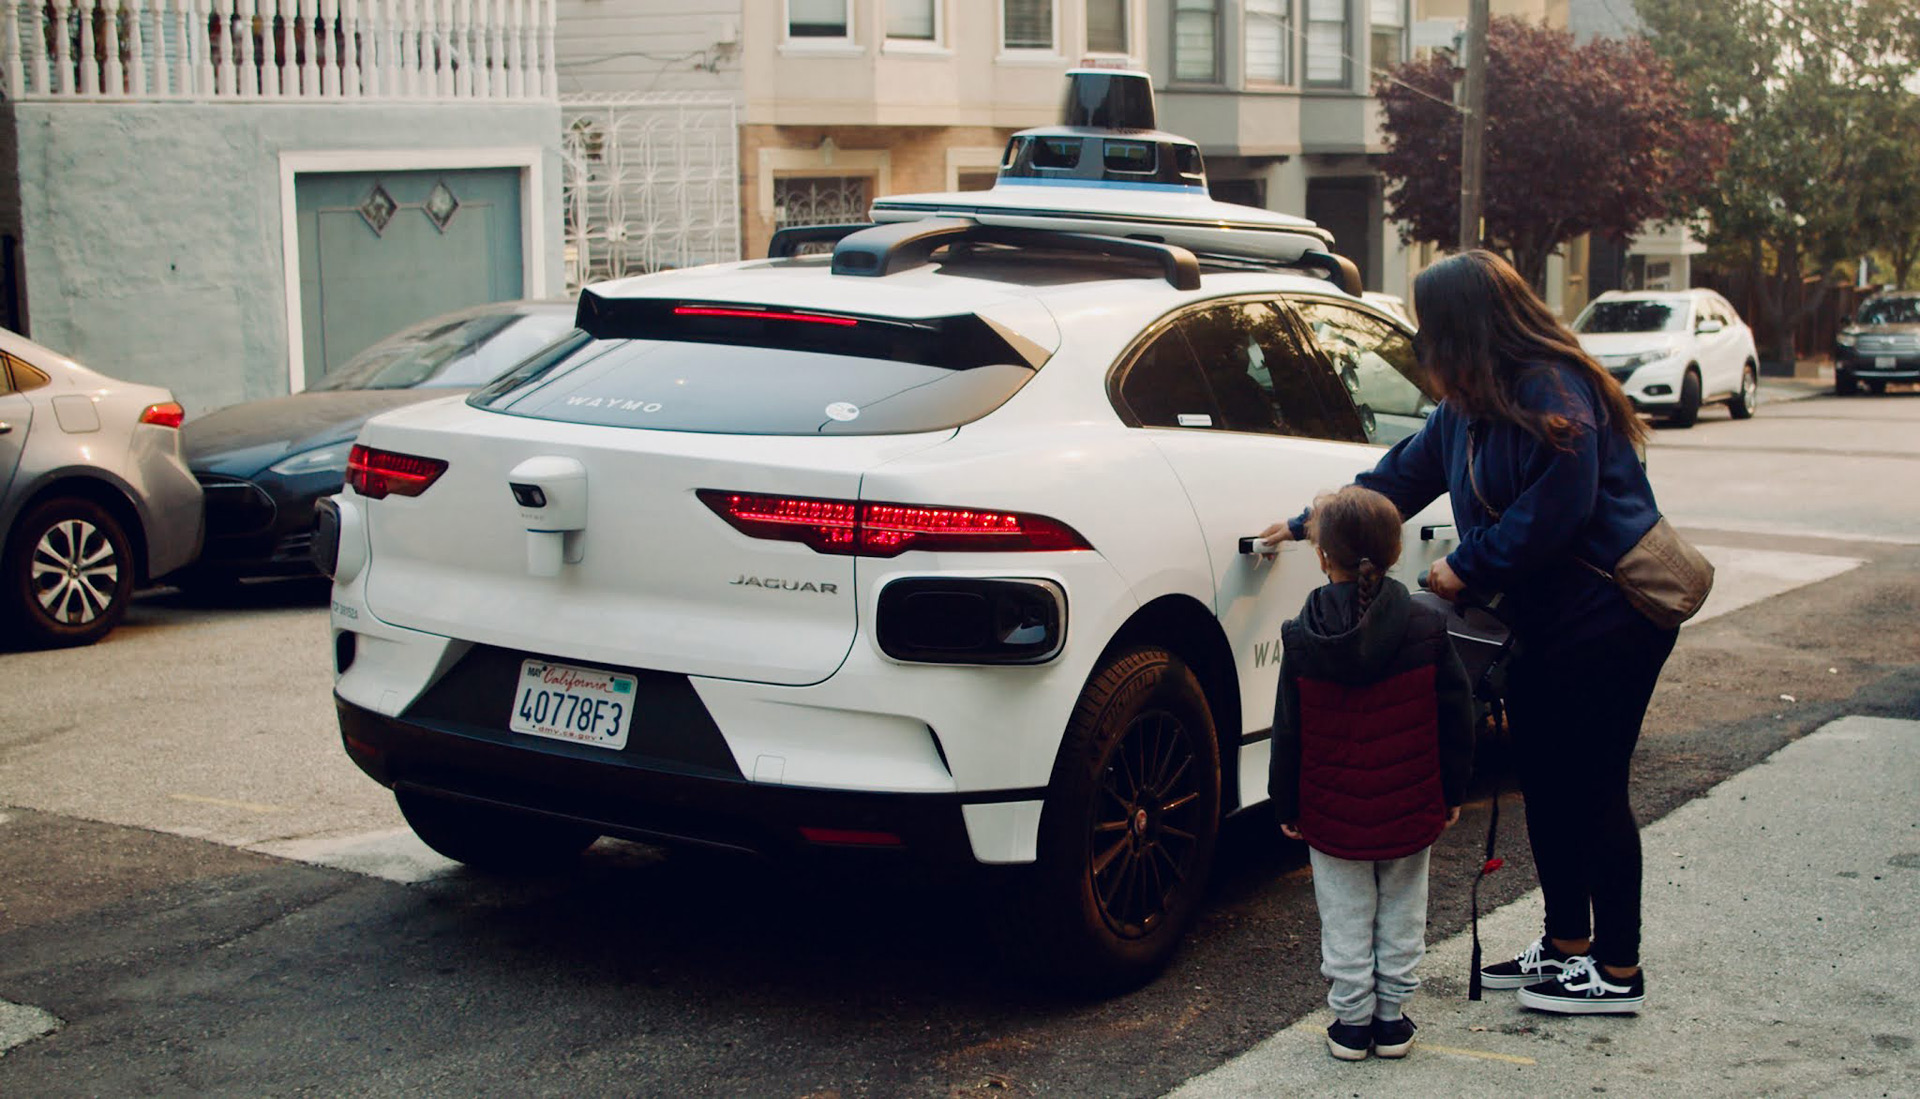 Waymo's selfdriving Jaguar IPace electric cars are ready for passengers